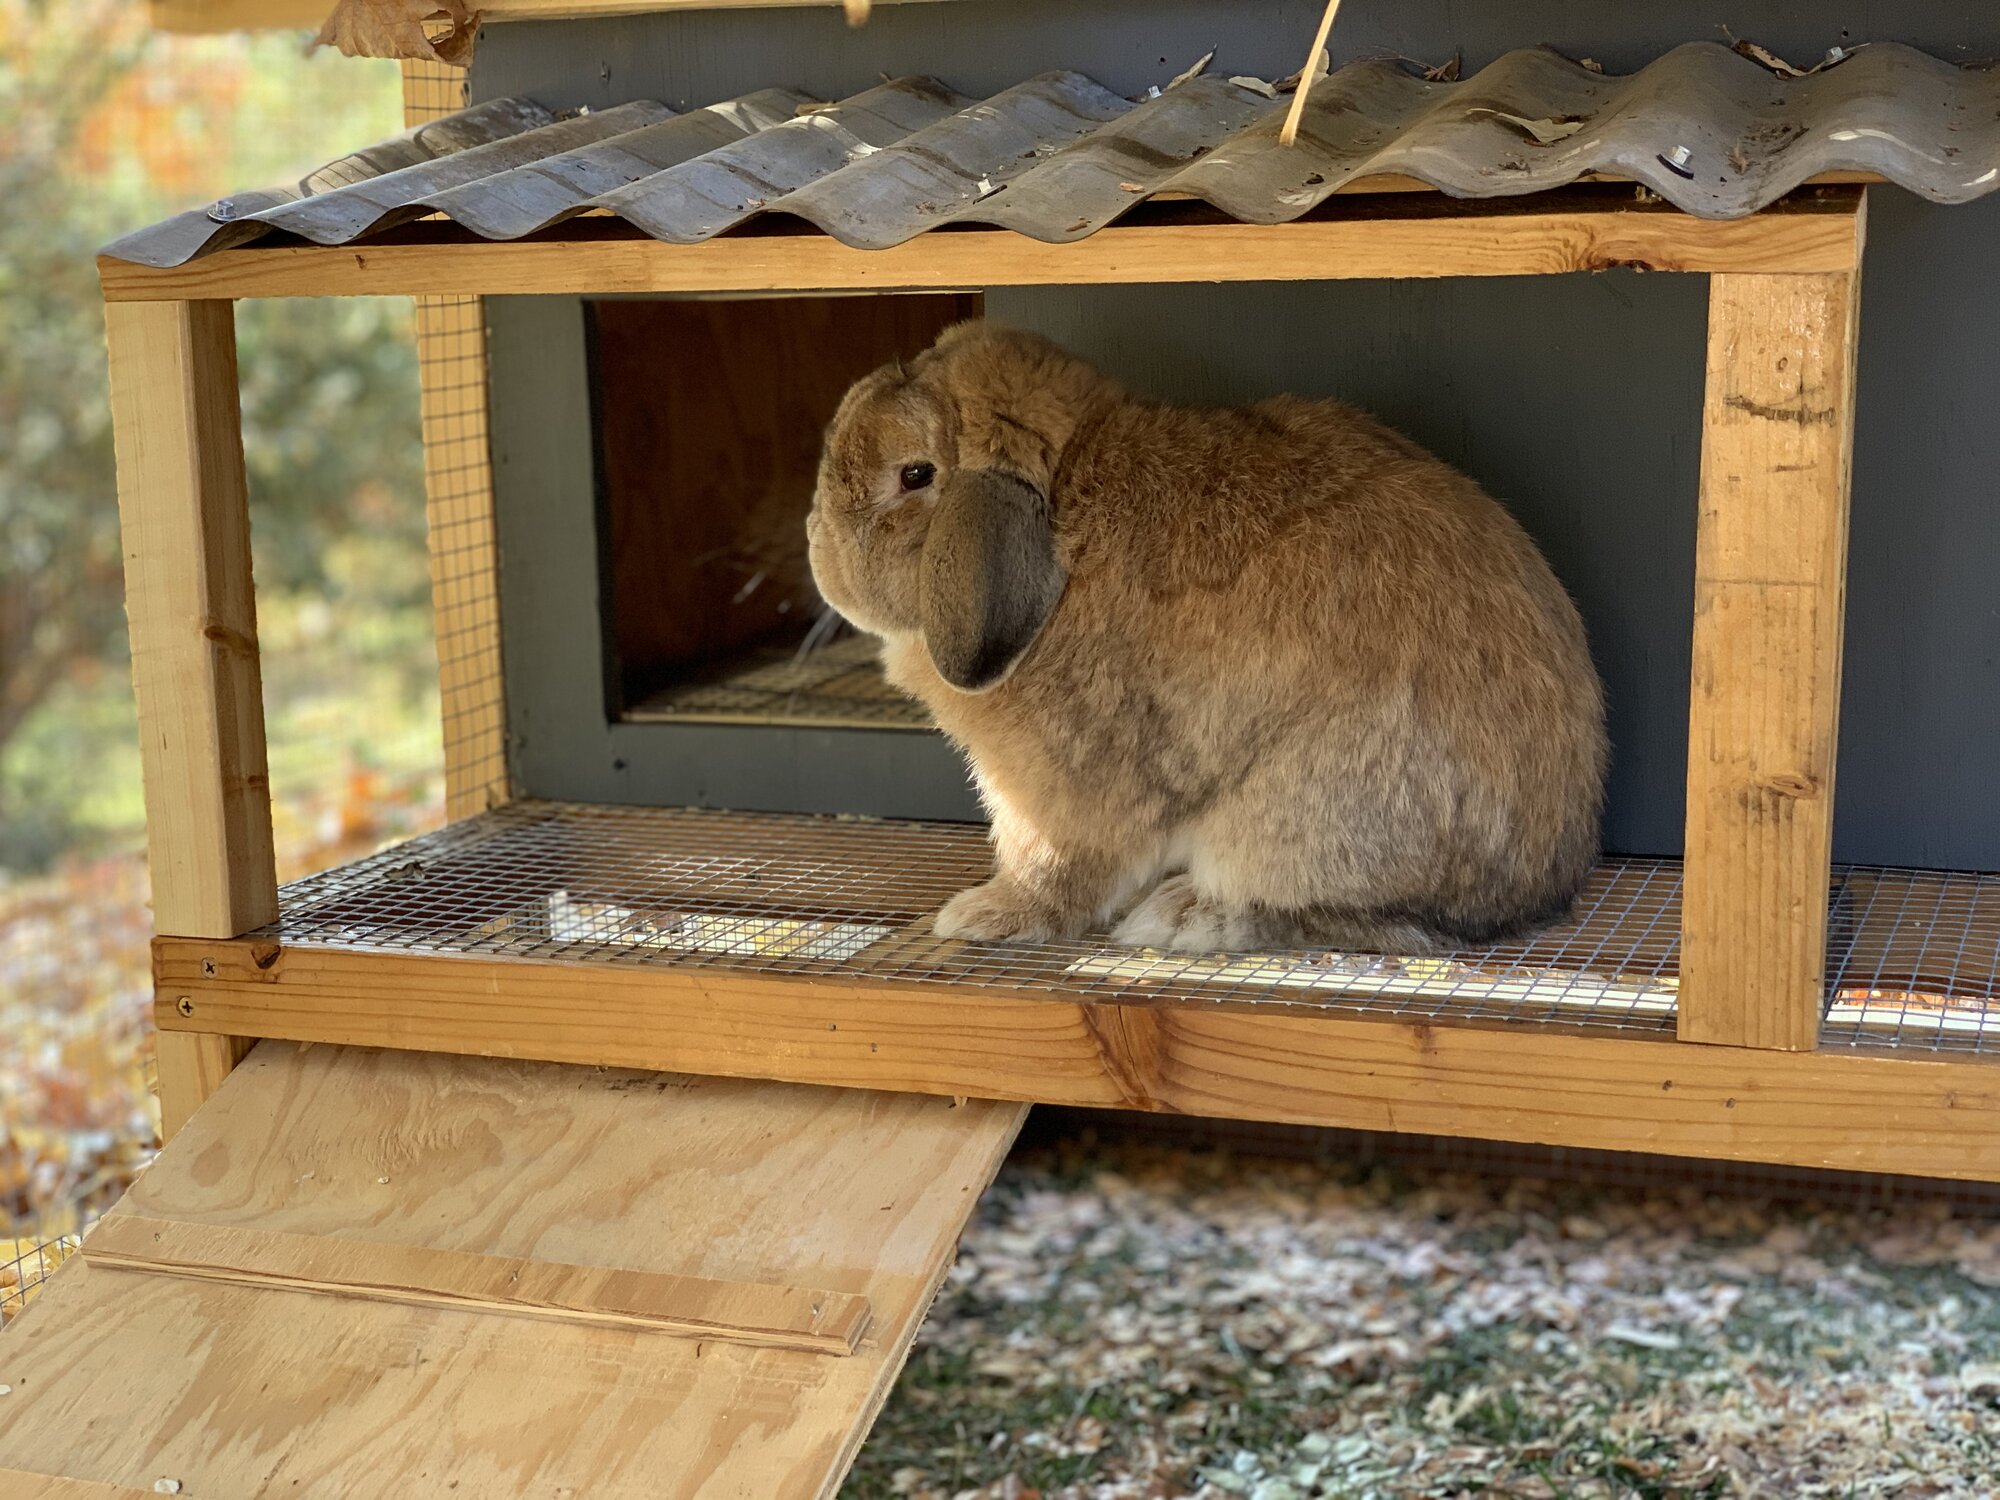 "Bunny Wunny" in his new house, 2019